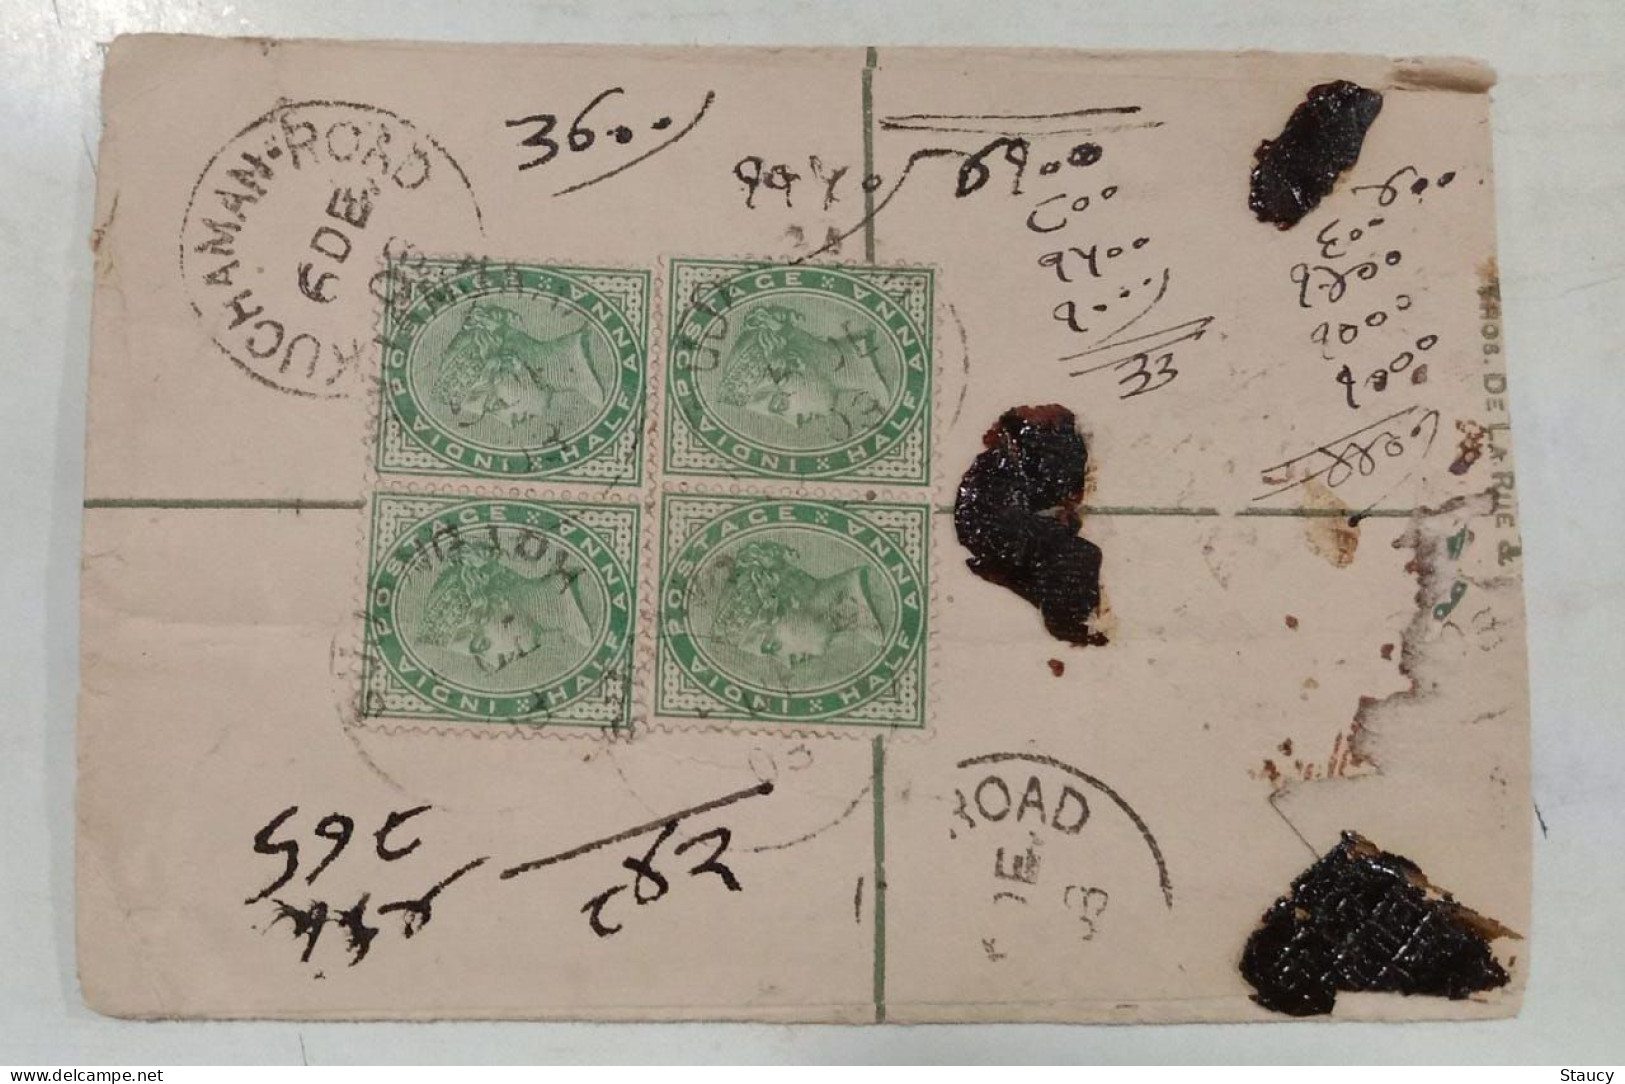 BRITISH INDIA 1898? QV 4 X 1/2a FRANKING On Registered QV COVER, NICE CANC ON FRONT & BACK, RARE As Per Scan - Jaipur